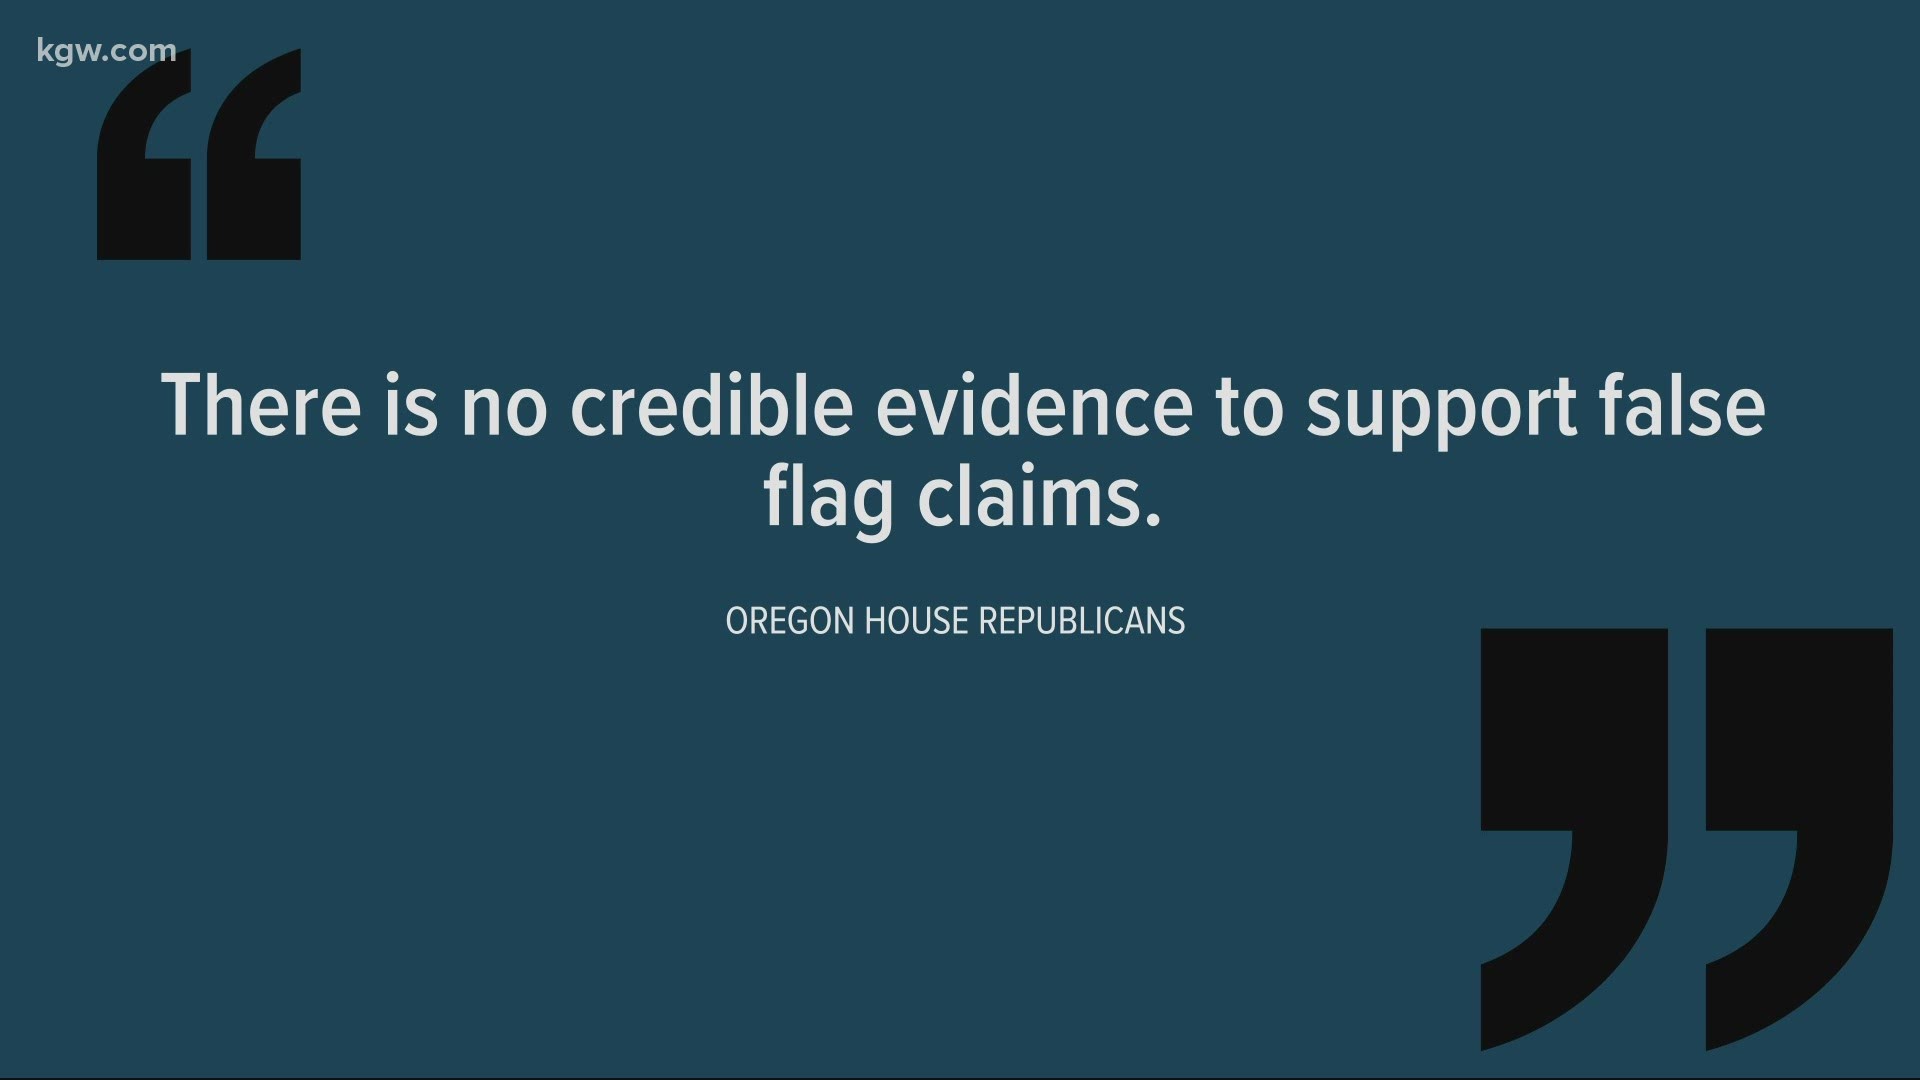 House Republicans released a statement about Oregon Republican Party’s resolution labeling Capitol insurrection as “false flag.”